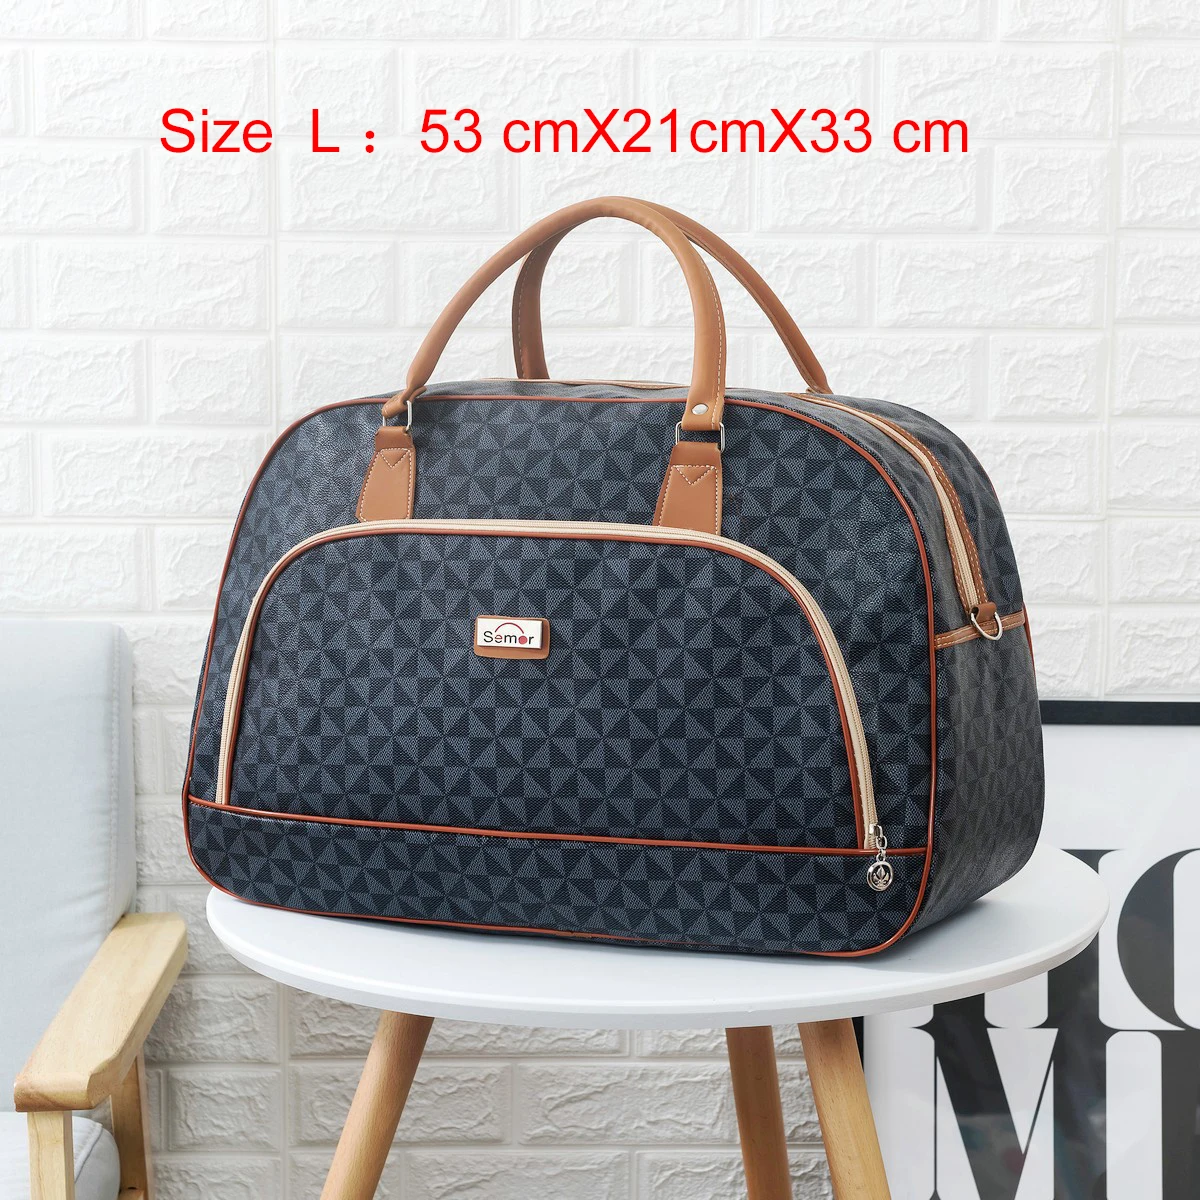 Stylish PU Xl Duffel Bag For Men And Women Perfect For Travel And Gifting  From Zhaoqiansun, $45.69